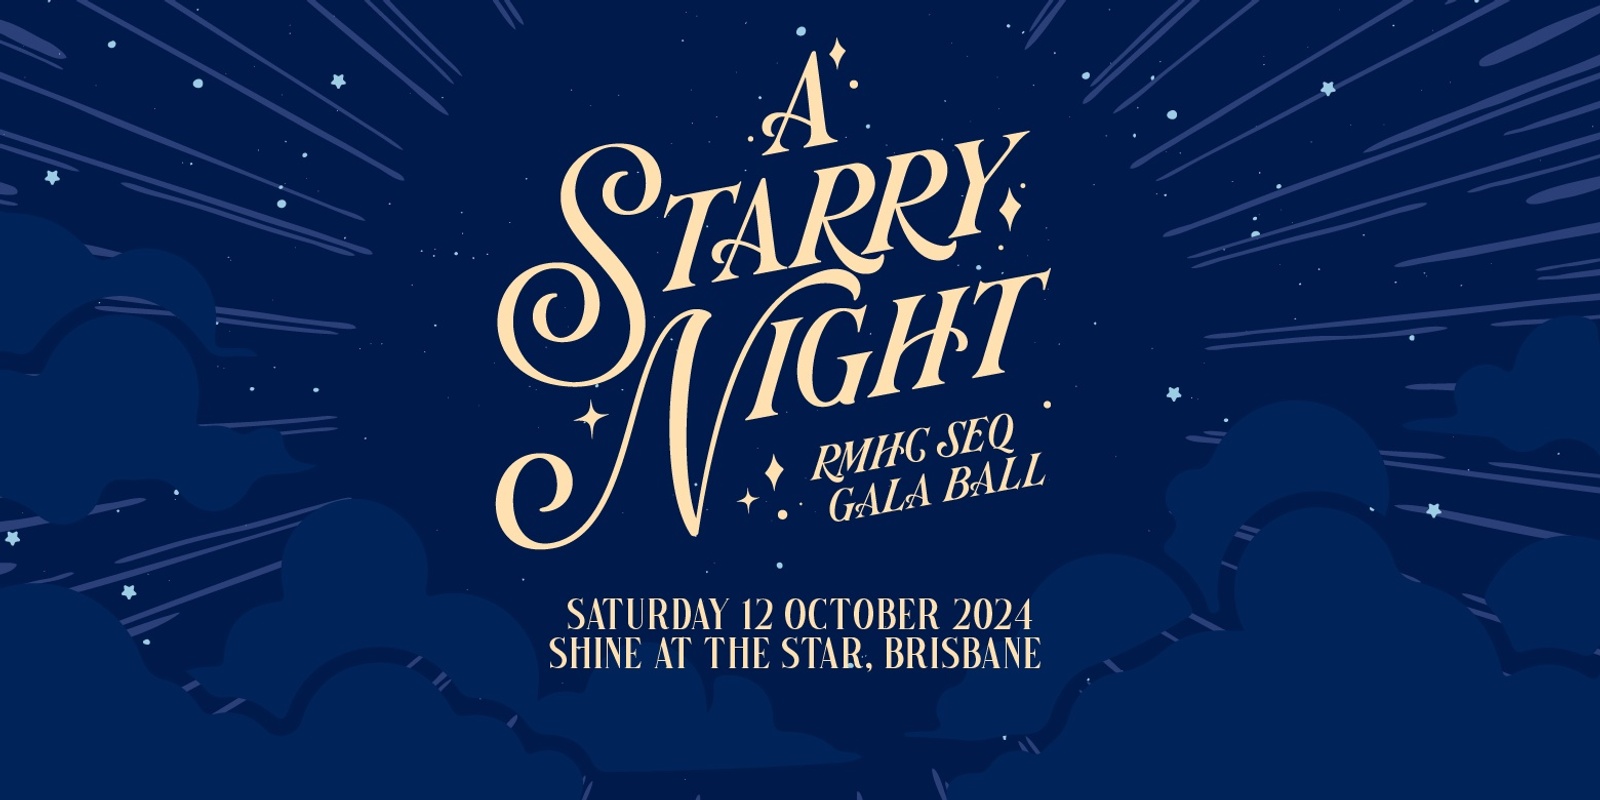 Banner image for A Starry Night, RMHC SEQ Gala Ball